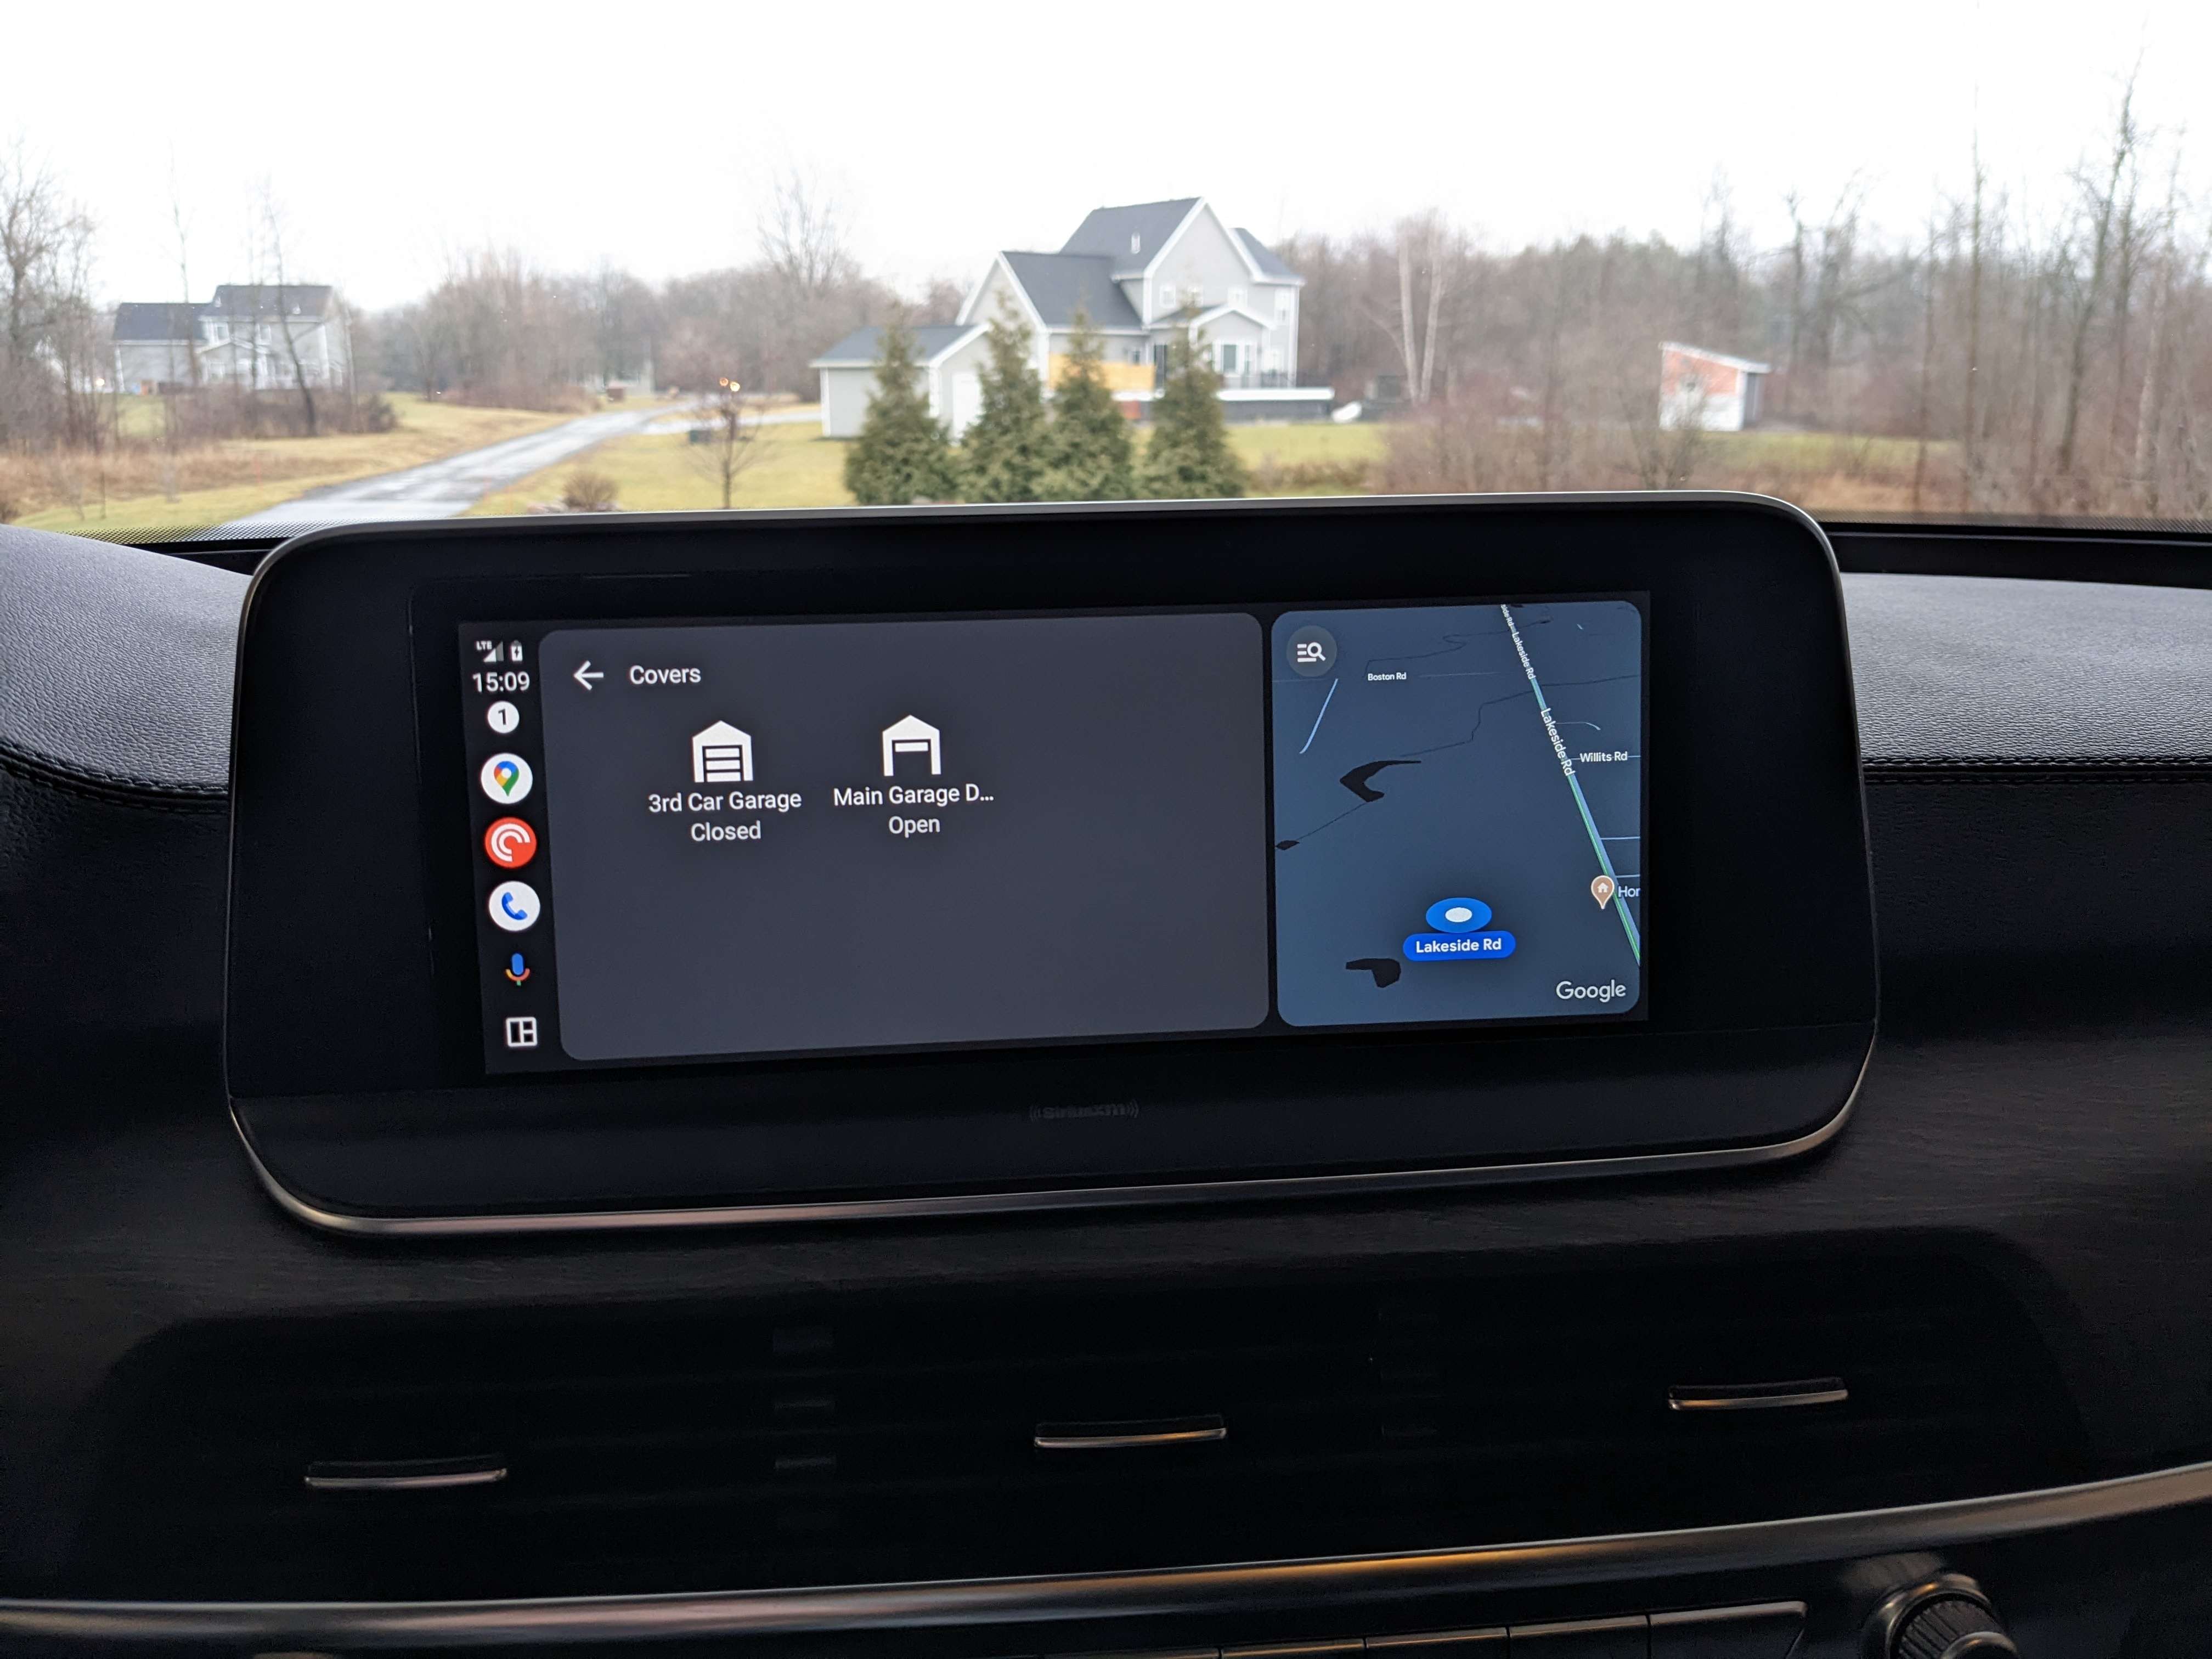 Google's new version of Android Auto focuses on Assistant